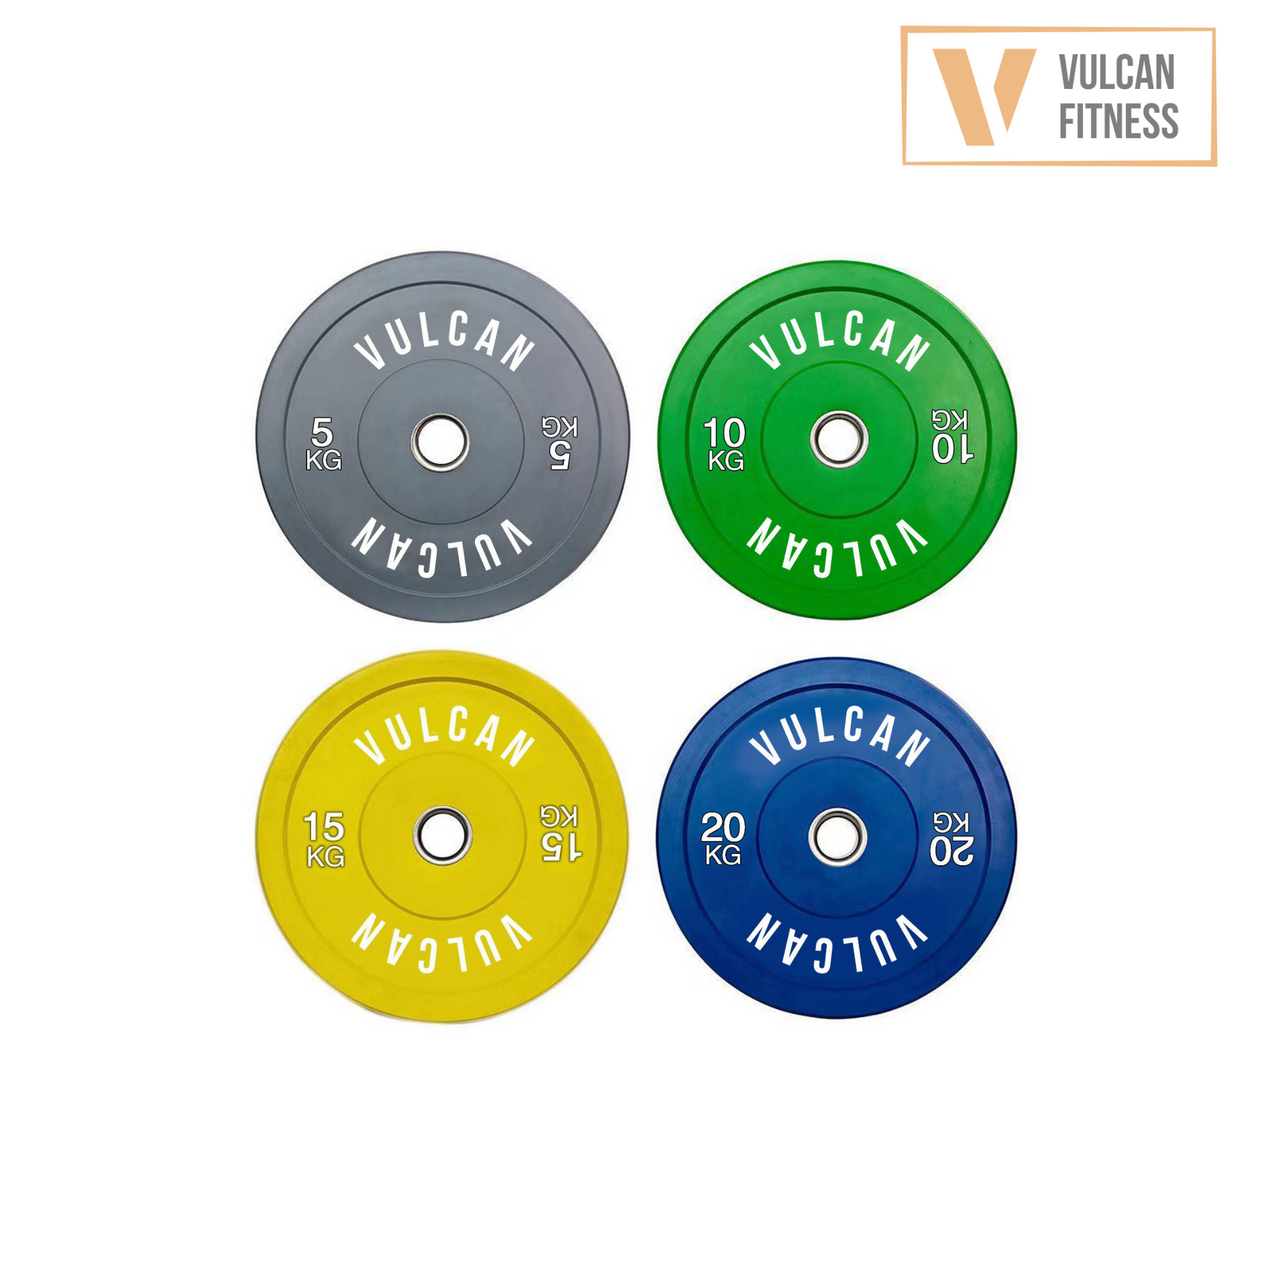 VULCAN Standard Colour Bumper Package (Olympic Barbell & 100kg Bumper Plates) | PRE-ORDER MID-LATE FEBRUARY